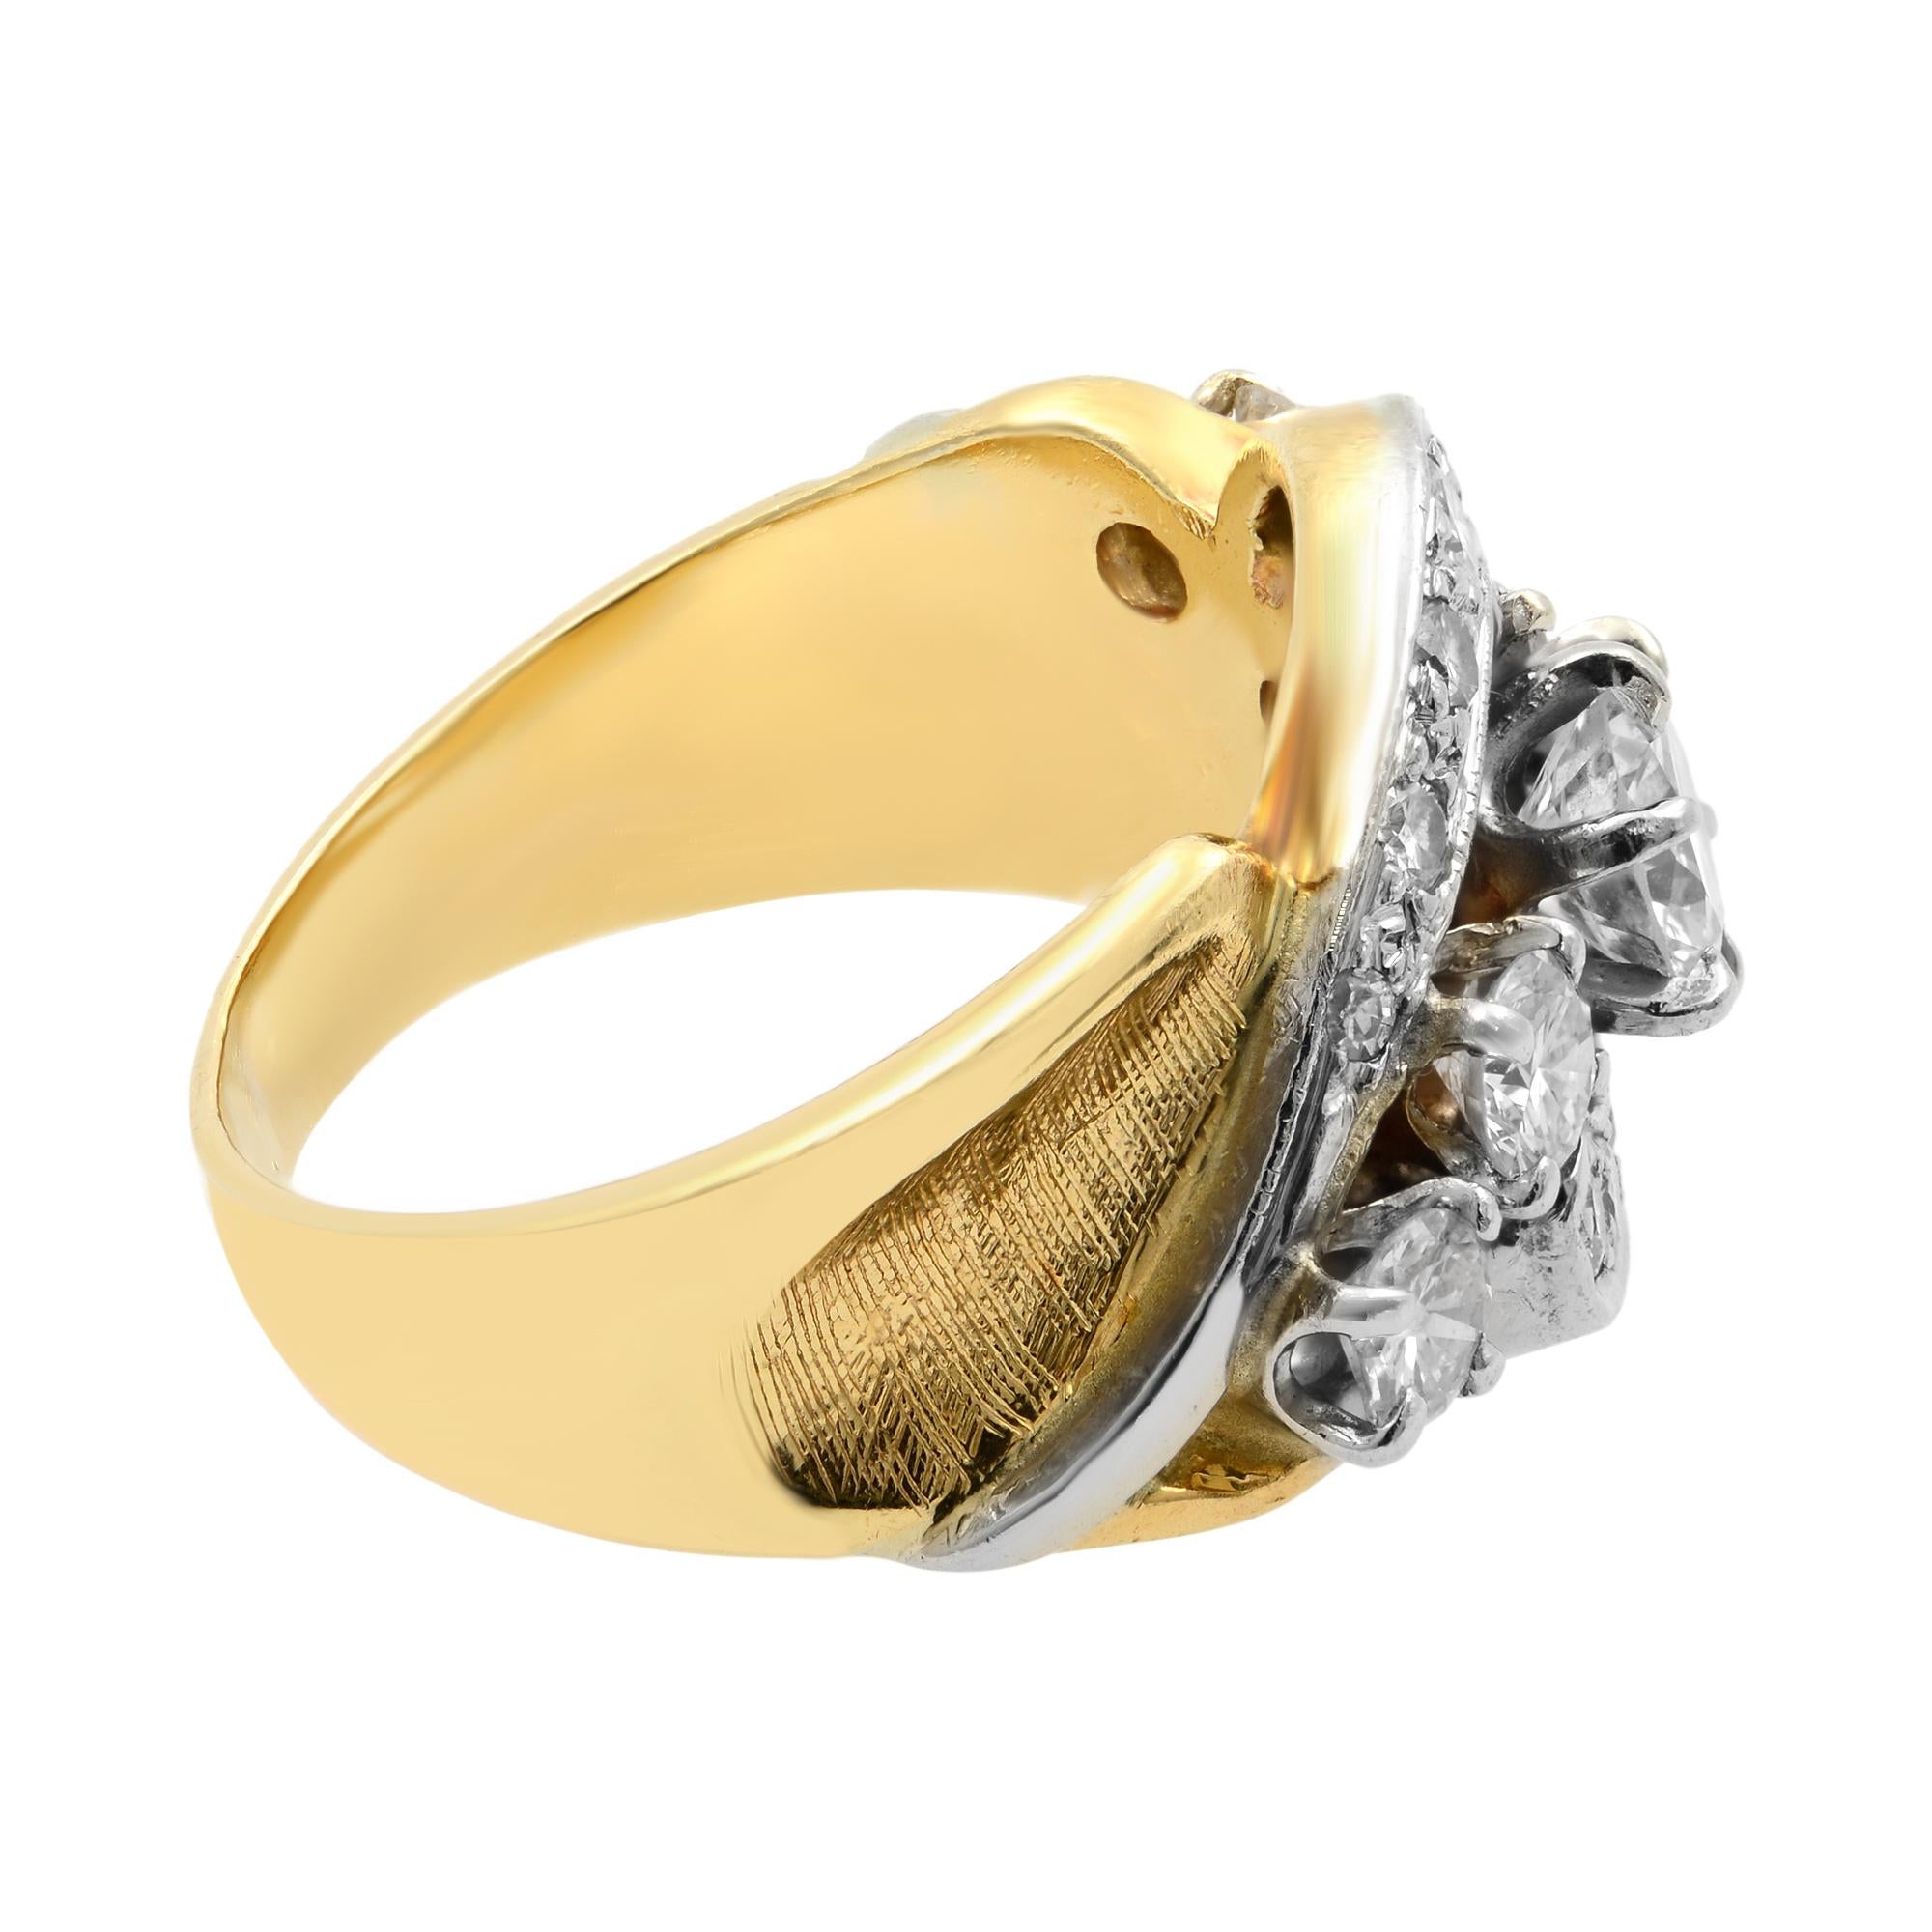 Estate 2.00Cttw Round Cut Diamond Ladies Ring 14K Yellow Gold In Excellent Condition For Sale In New York, NY